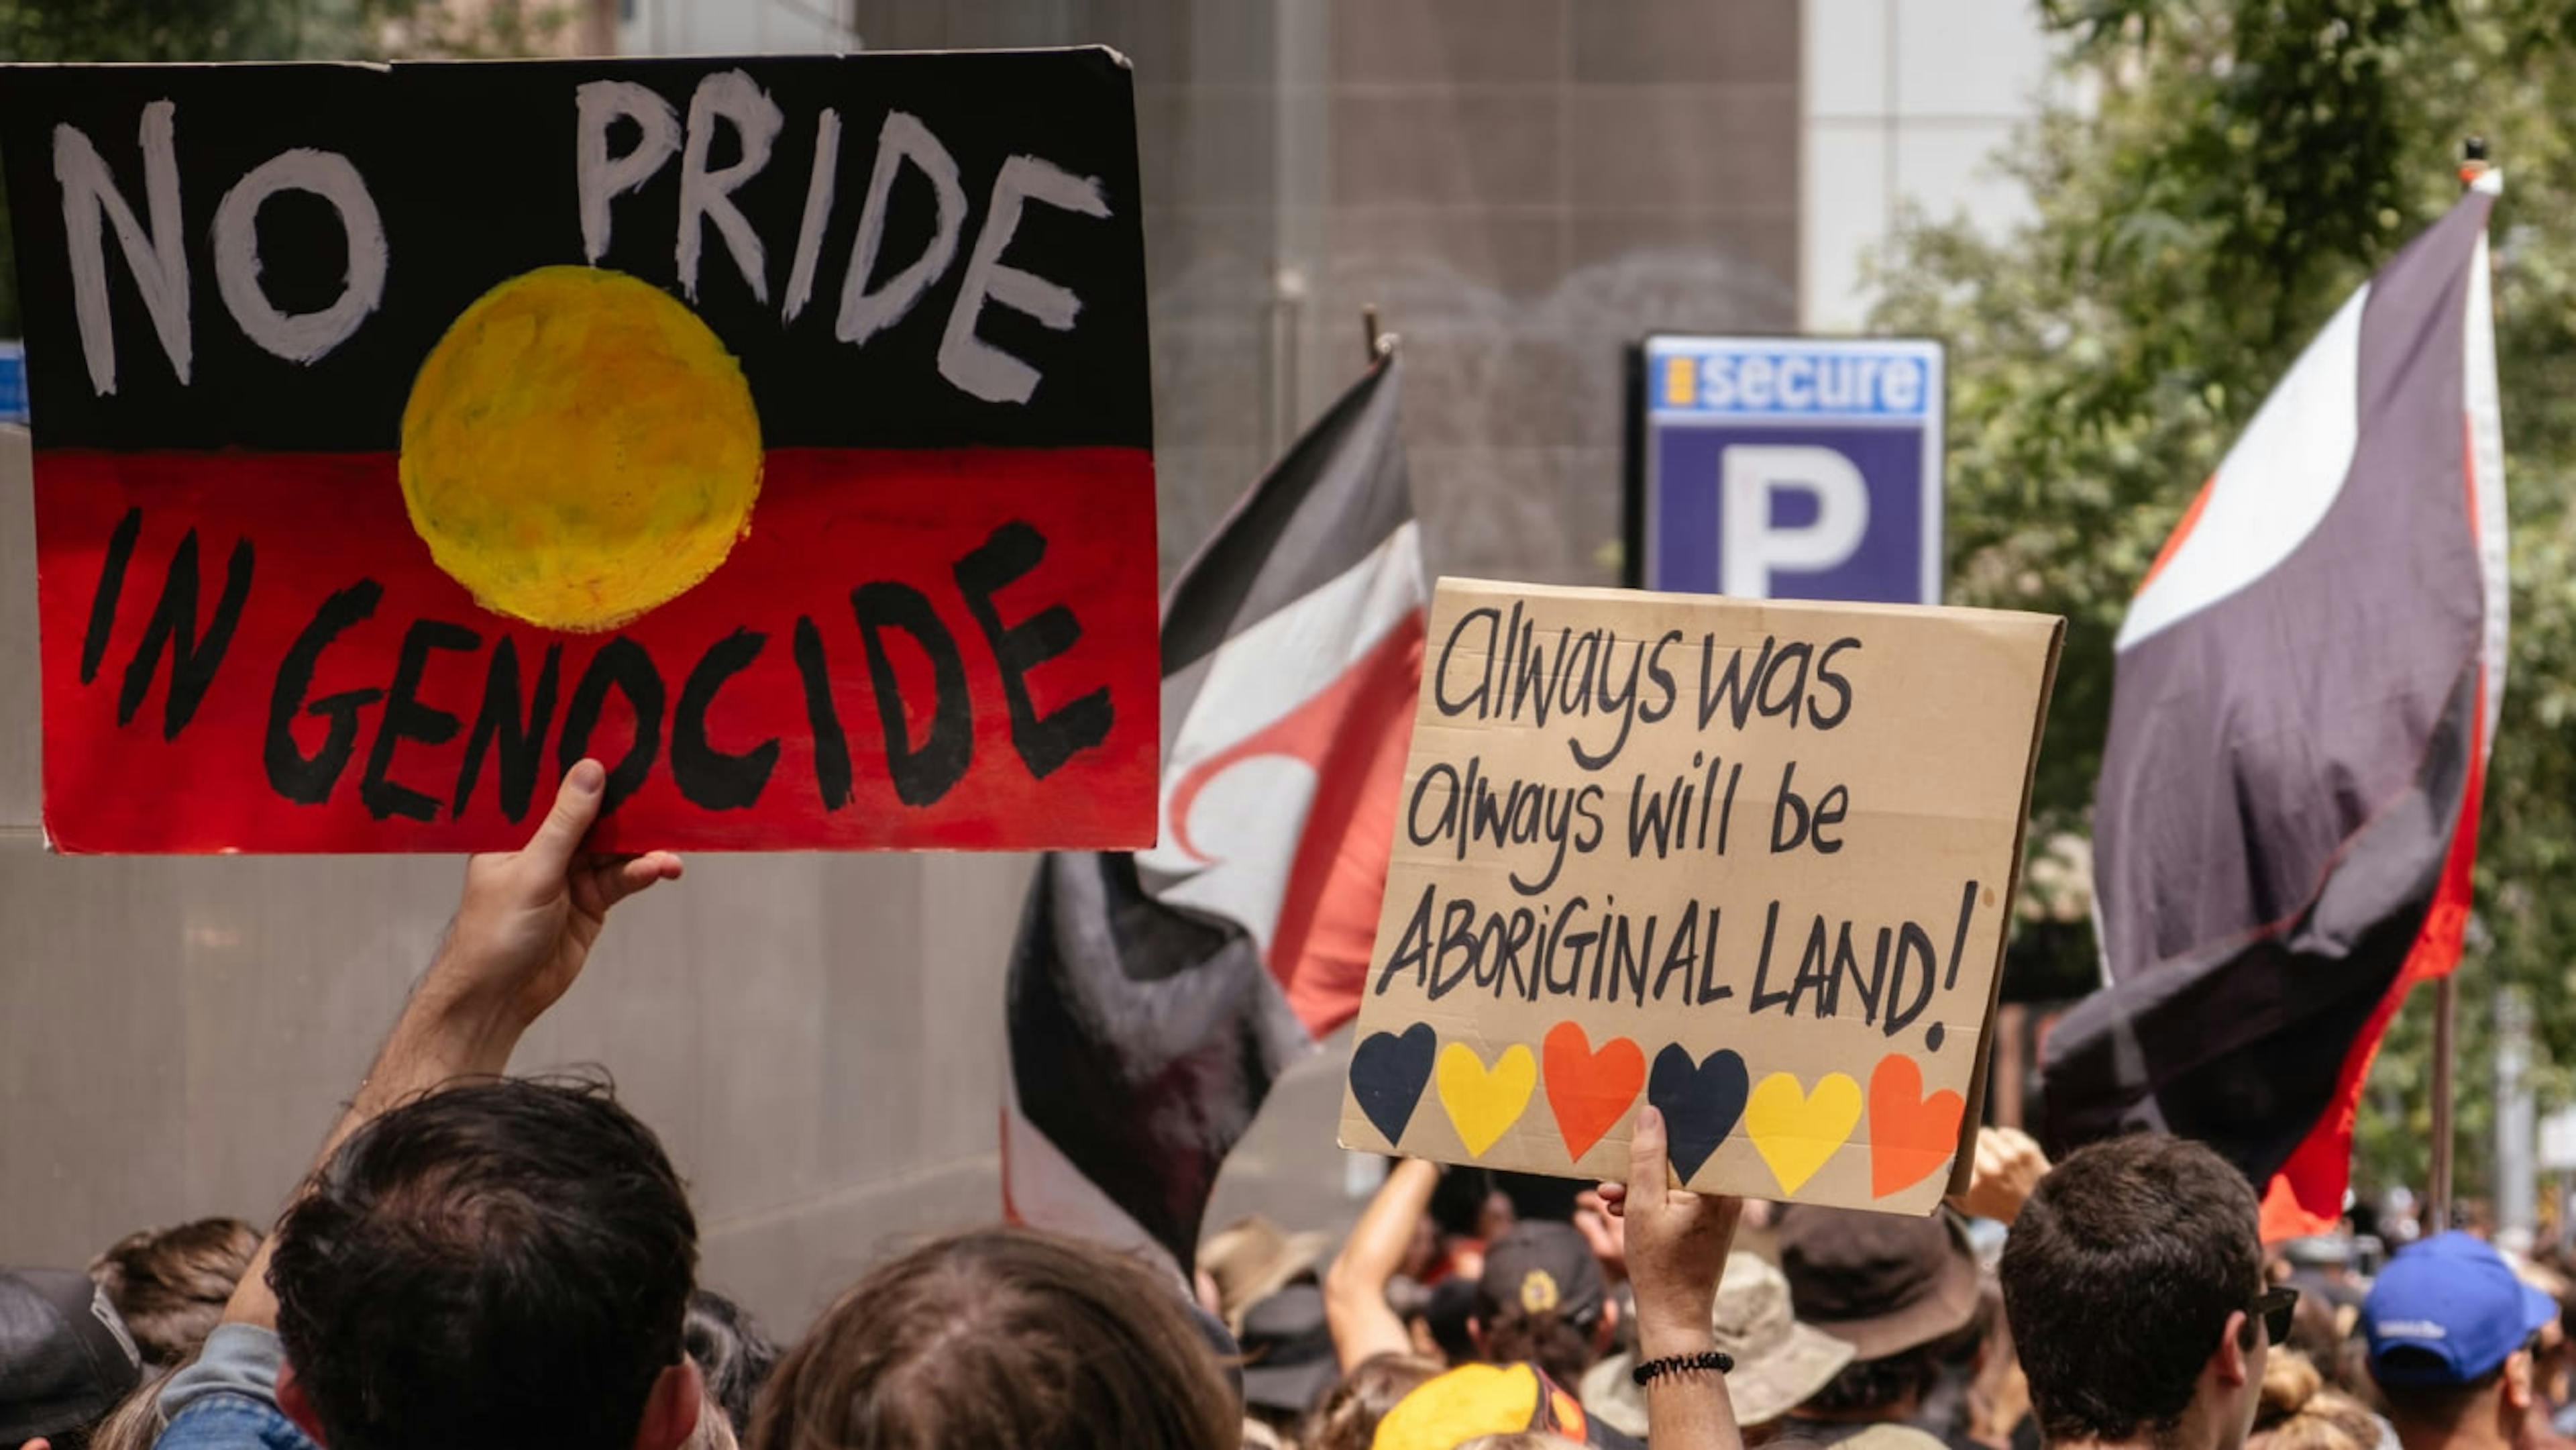 The First Nations people of Australia suffered immeasurable harm because of colonialism